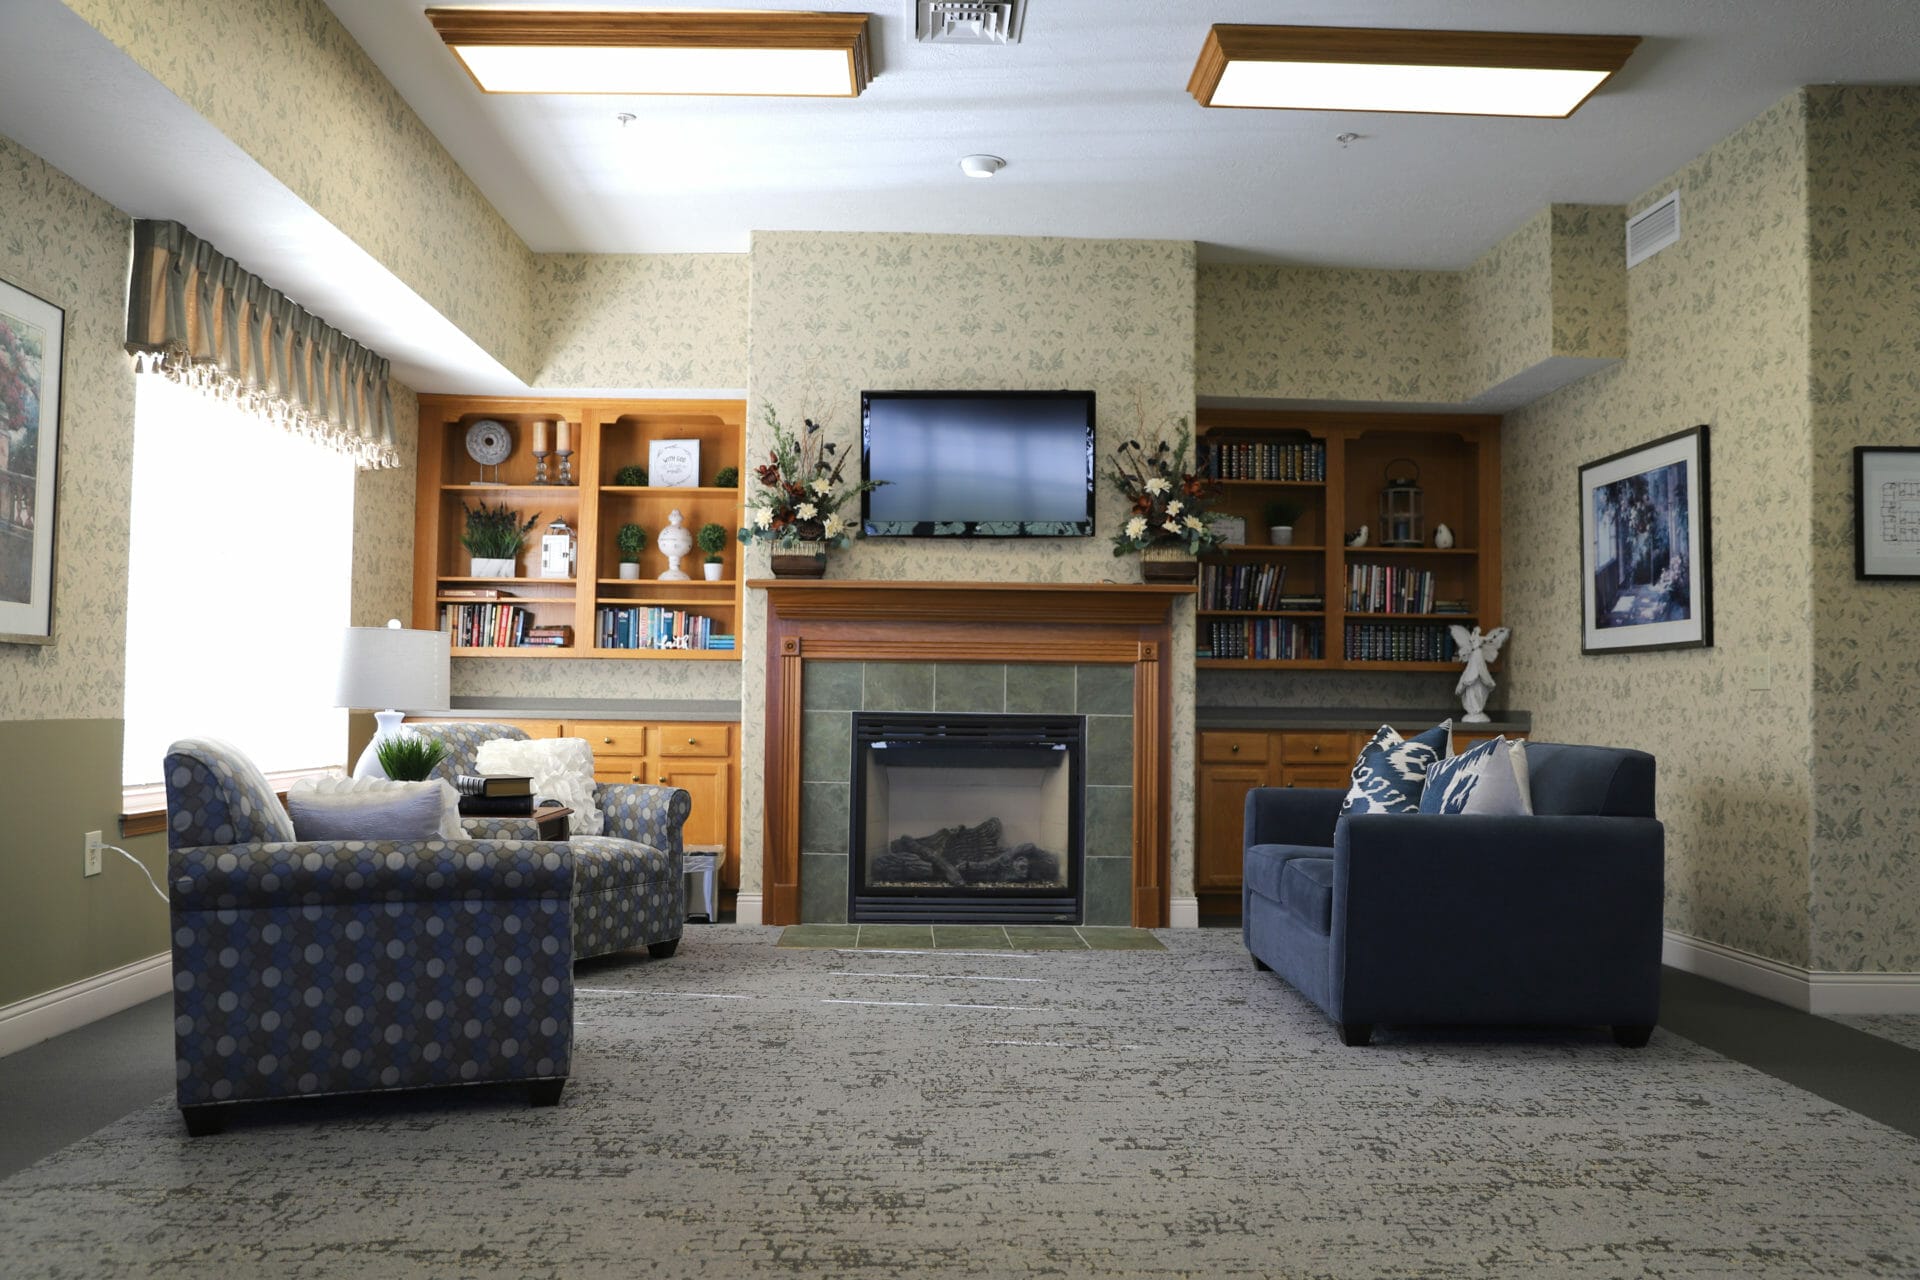 <span  class="uc_style_uc_tiles_grid_image_elementor_uc_items_attribute_title" style="color:#000000;">The sitting area at the meadow lakes assisted living apartments. </span>